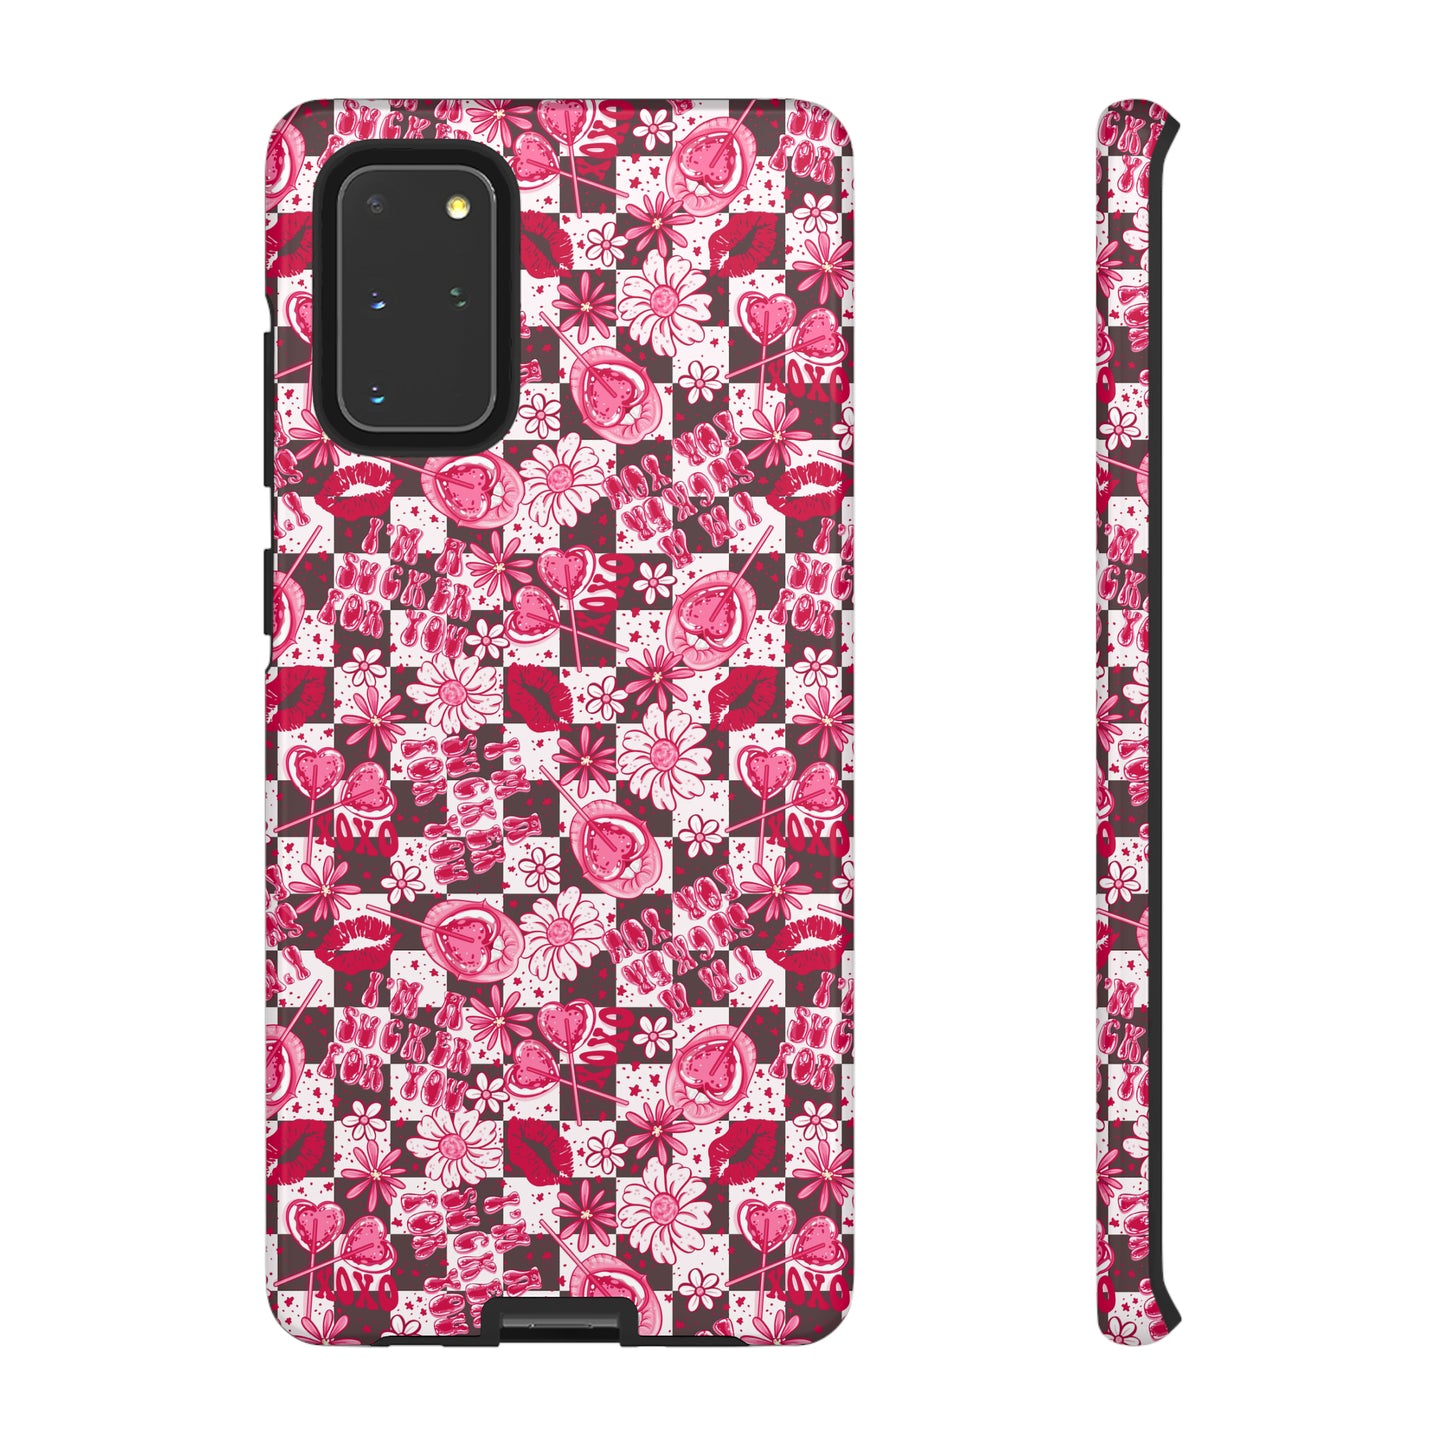 Im a Sucker for You Tough Phone Case for Iphones, Samsungs, and Google phones